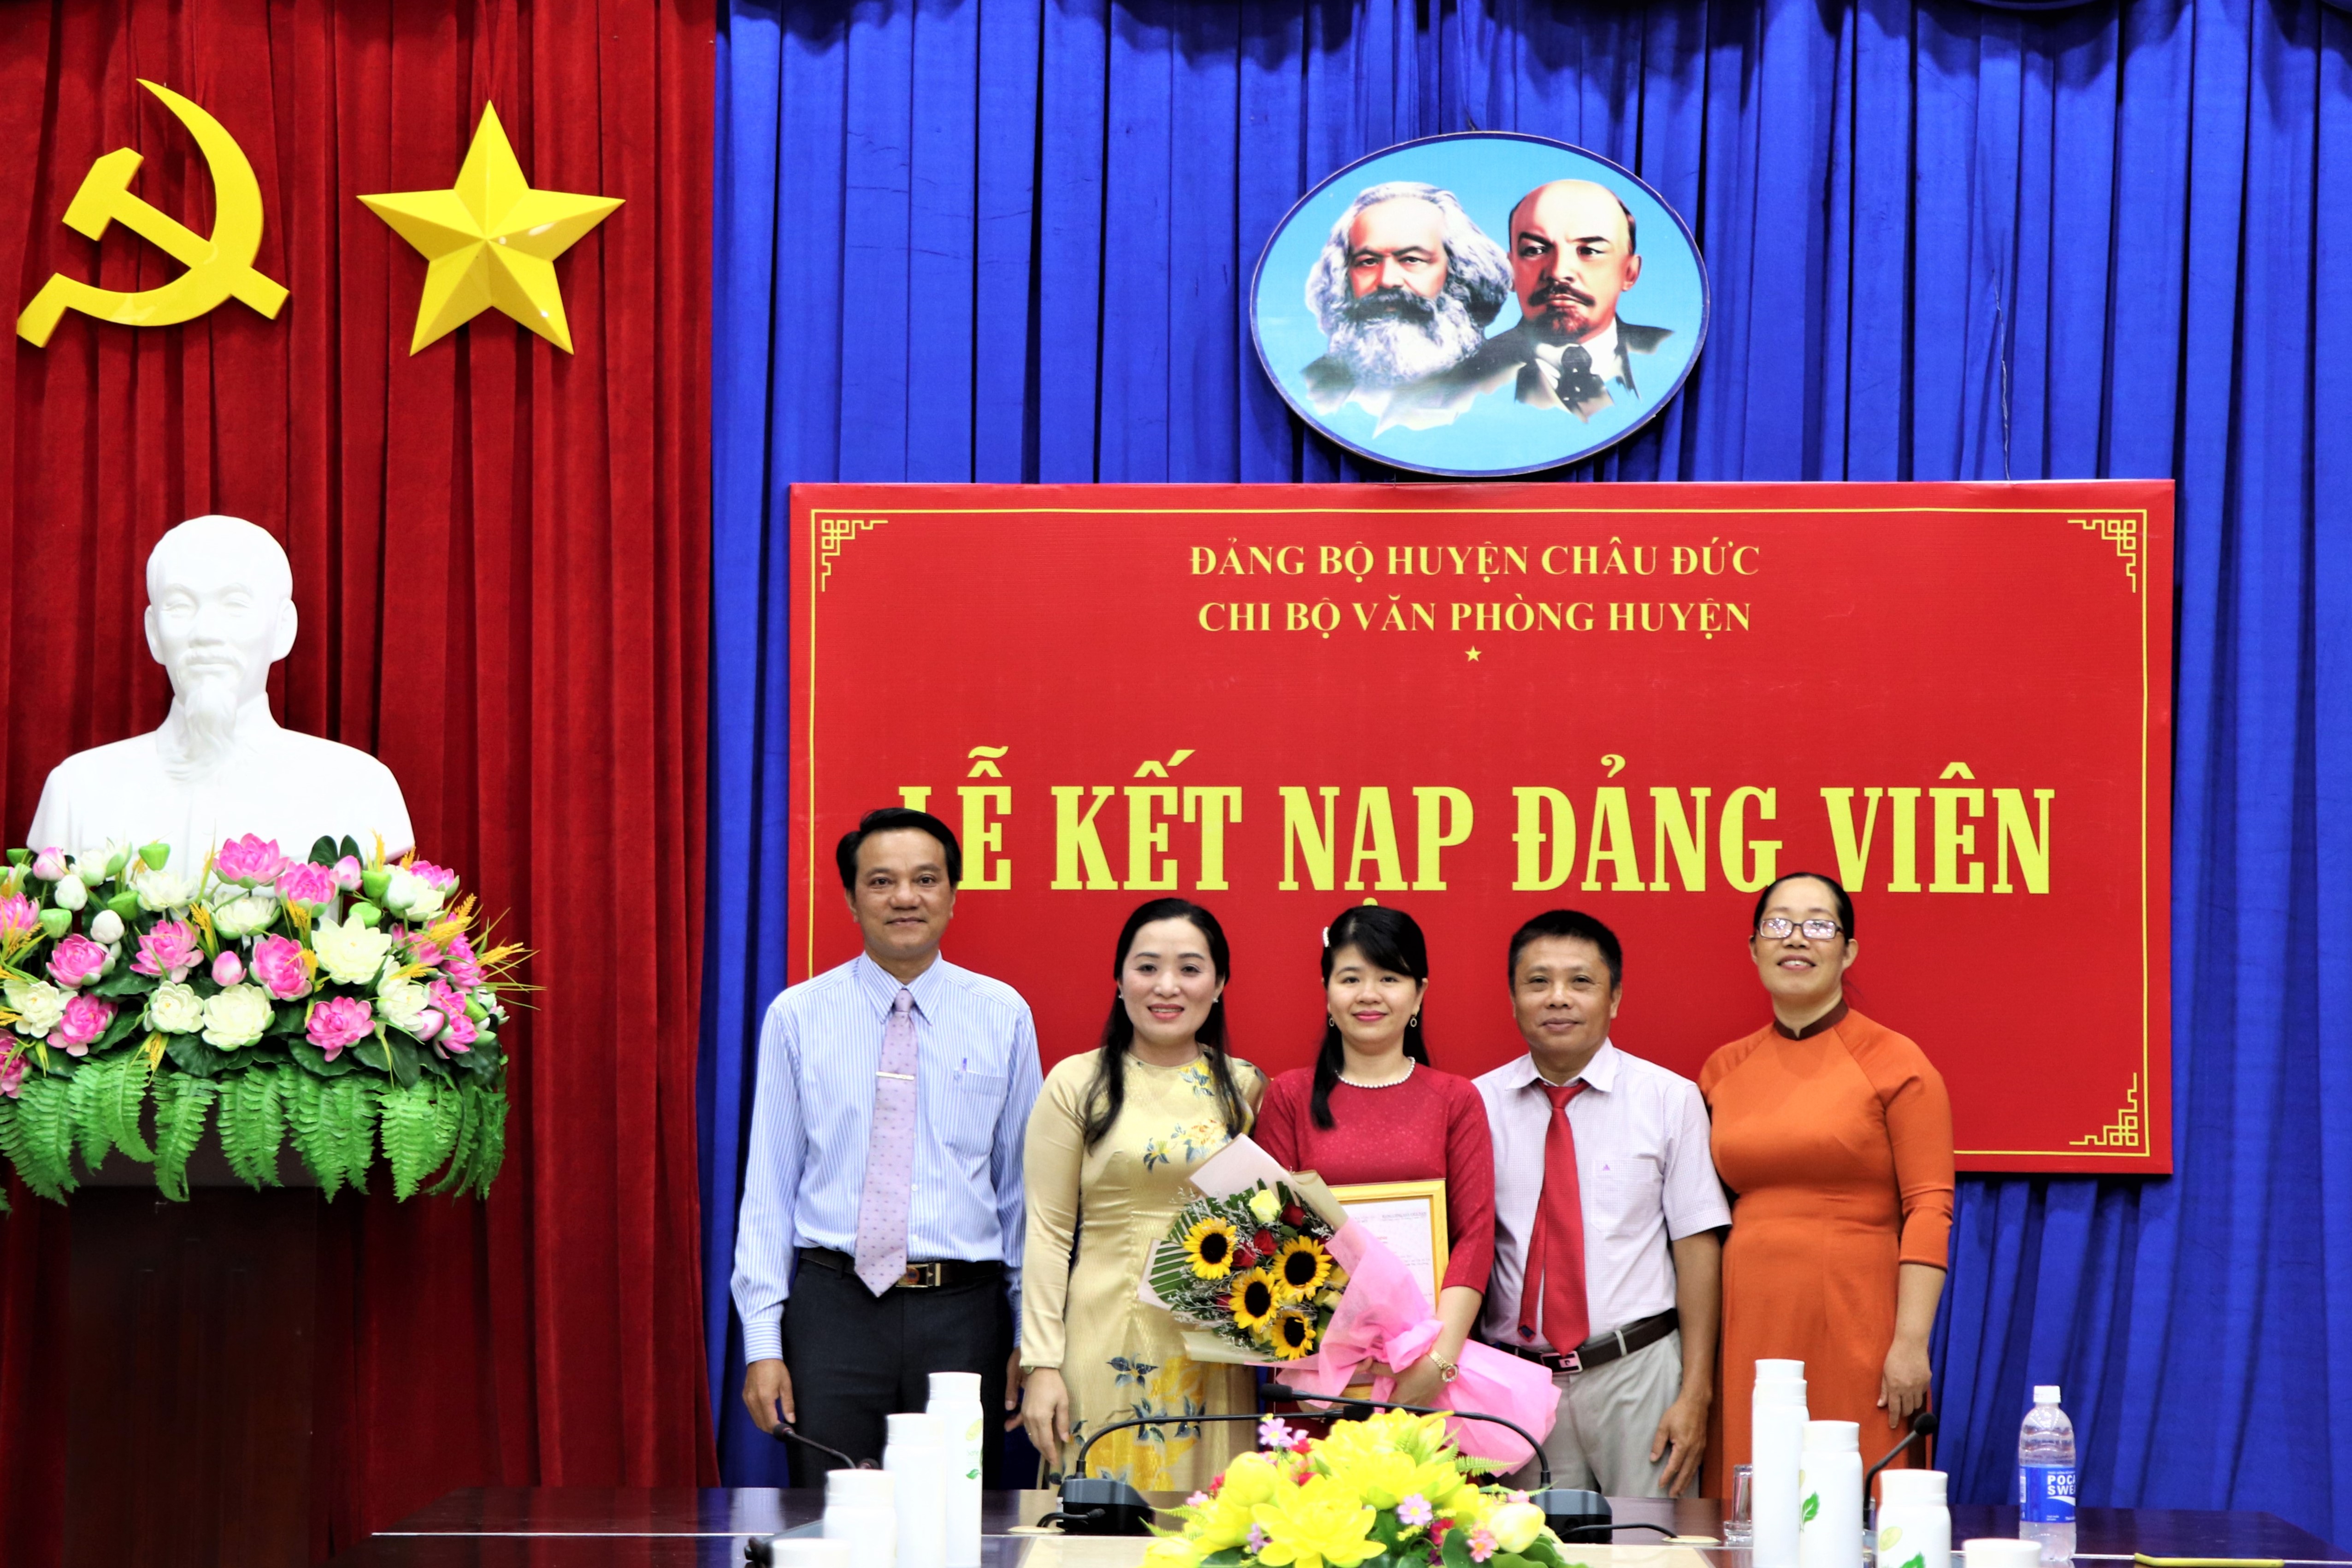 The latest procedures for admission of the newest party members in Vietnam